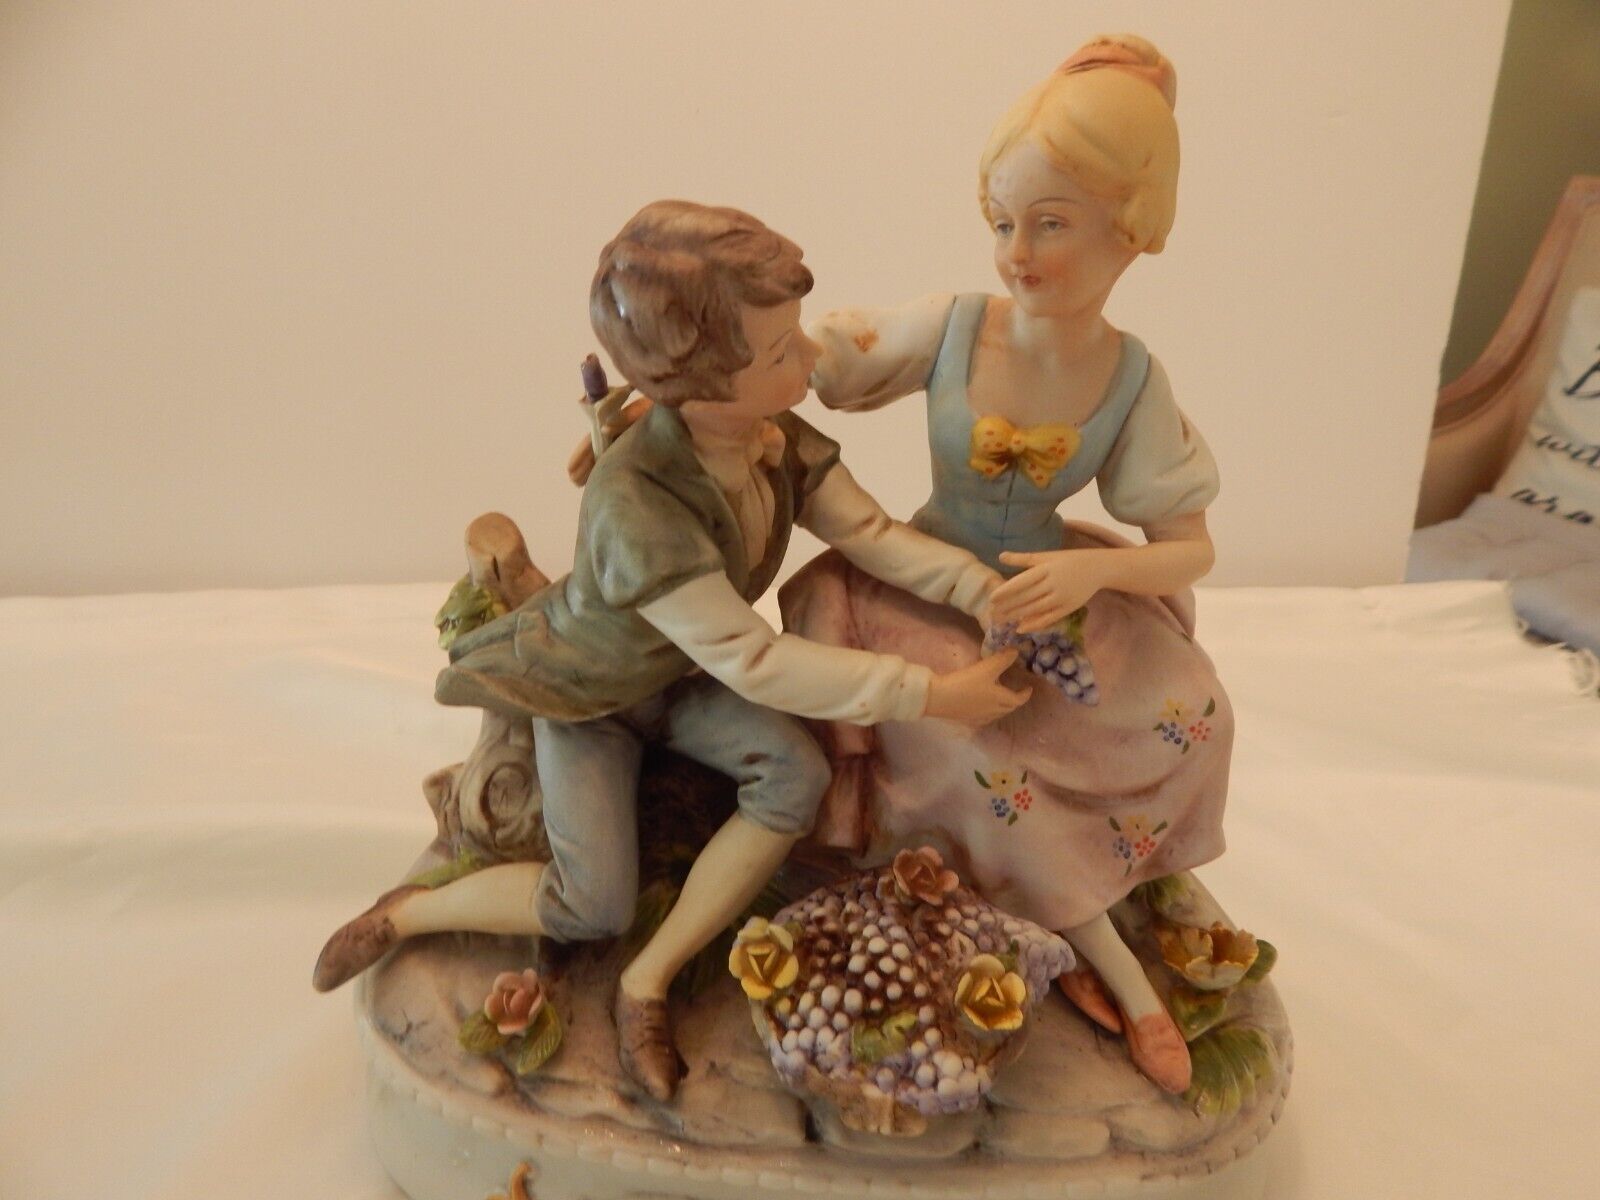 Vintage Lenwile Ardalt Japanese Courting Couple Bisque Figurine